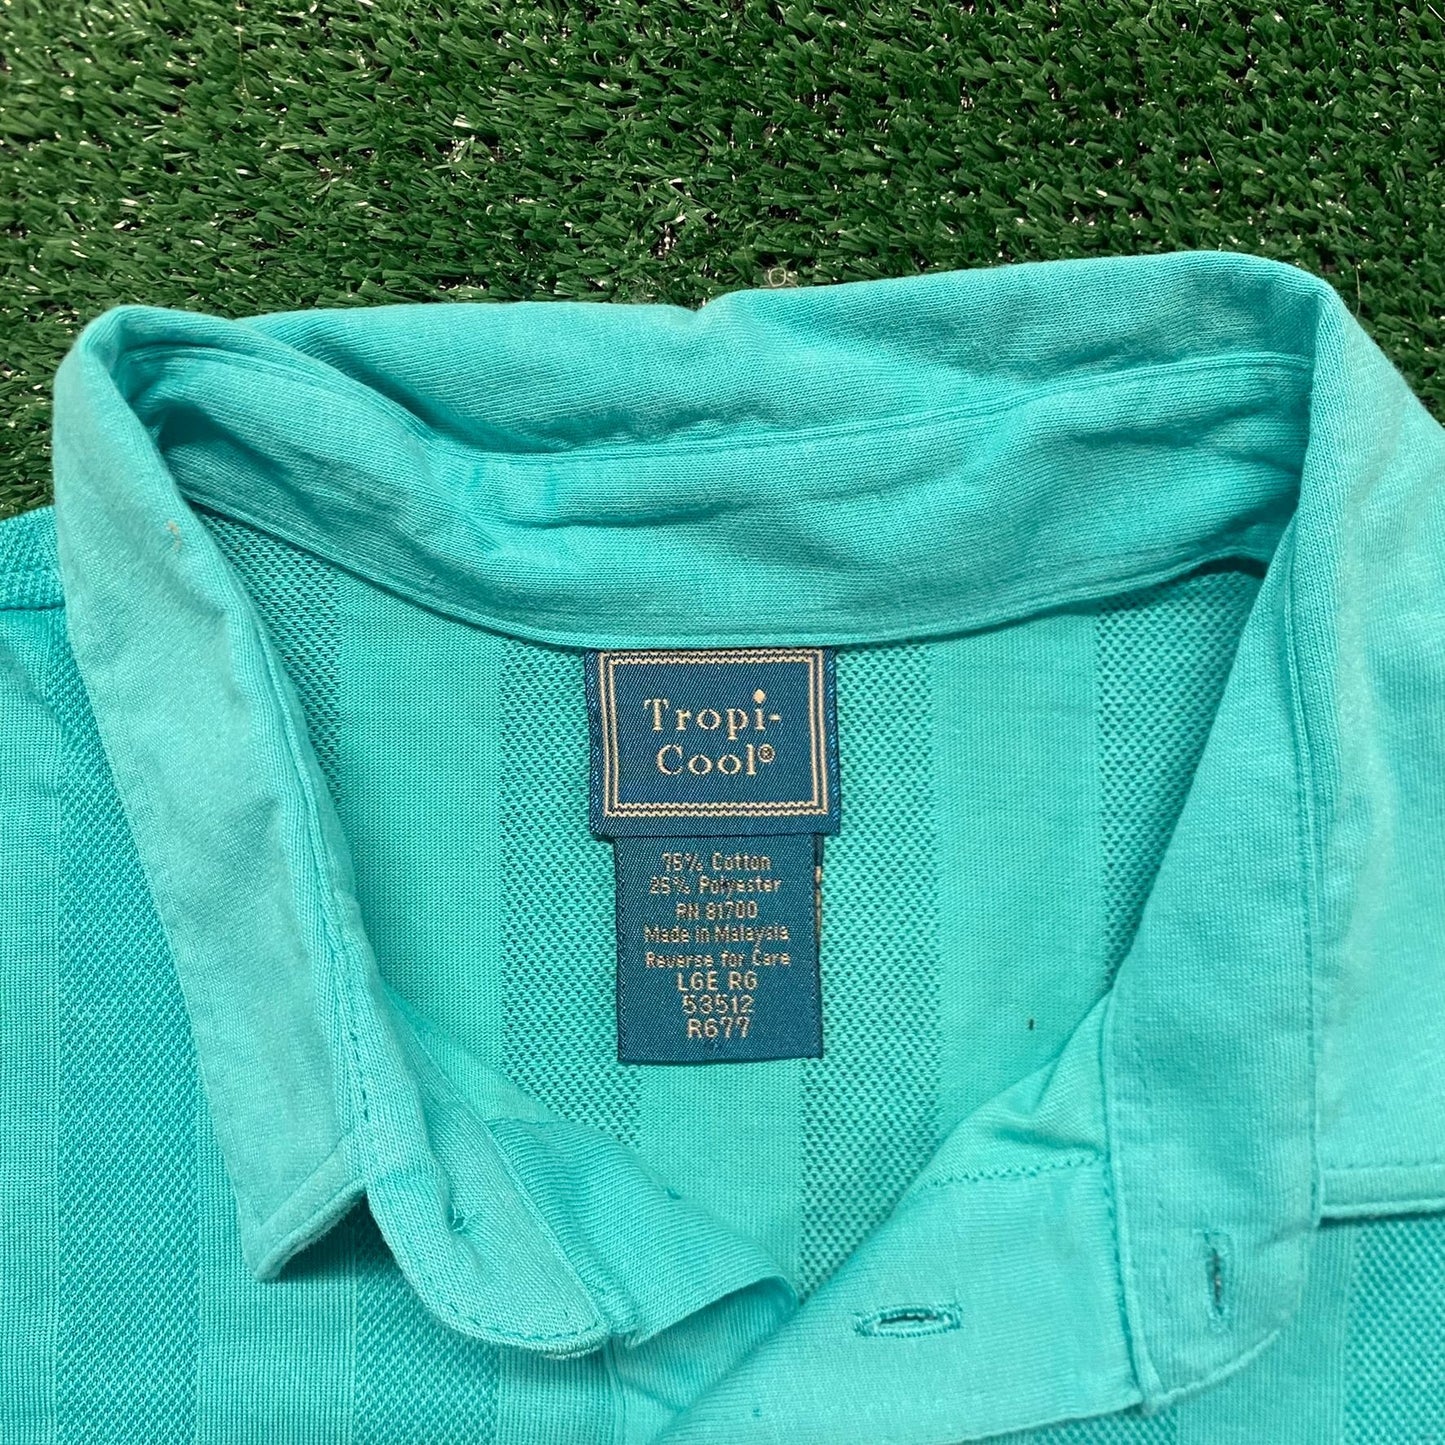 Teal Blue Striped Vintage Preppy Vented Polo Shirt